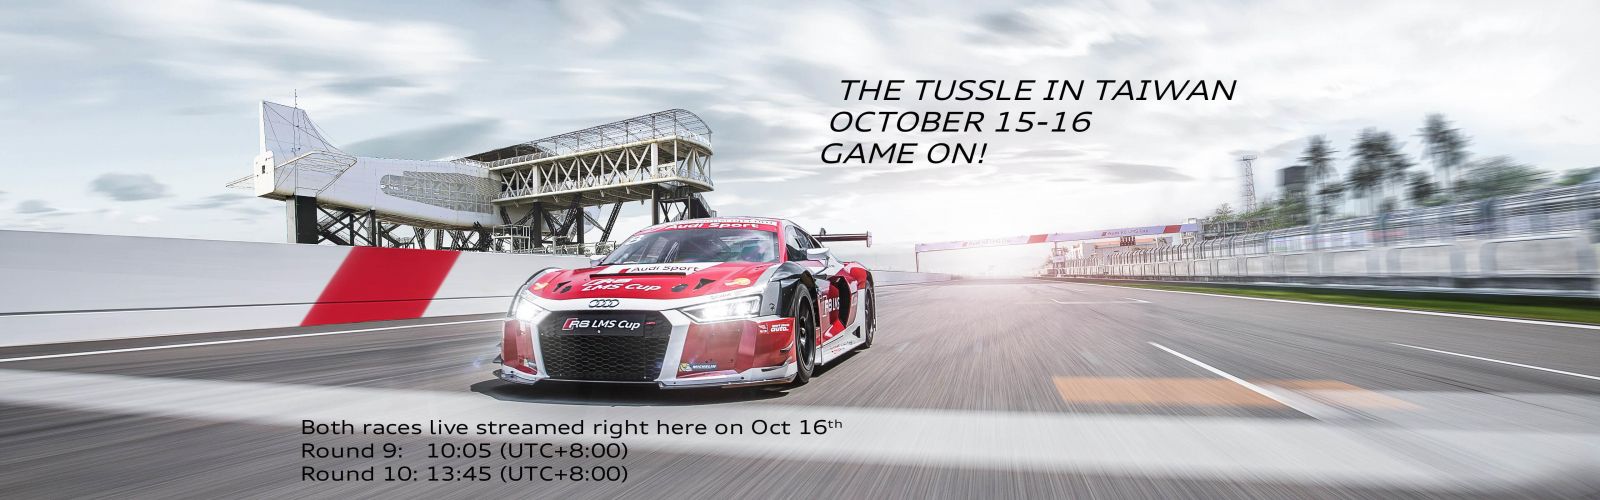 Audi R8 LMS Cup15日開戰。